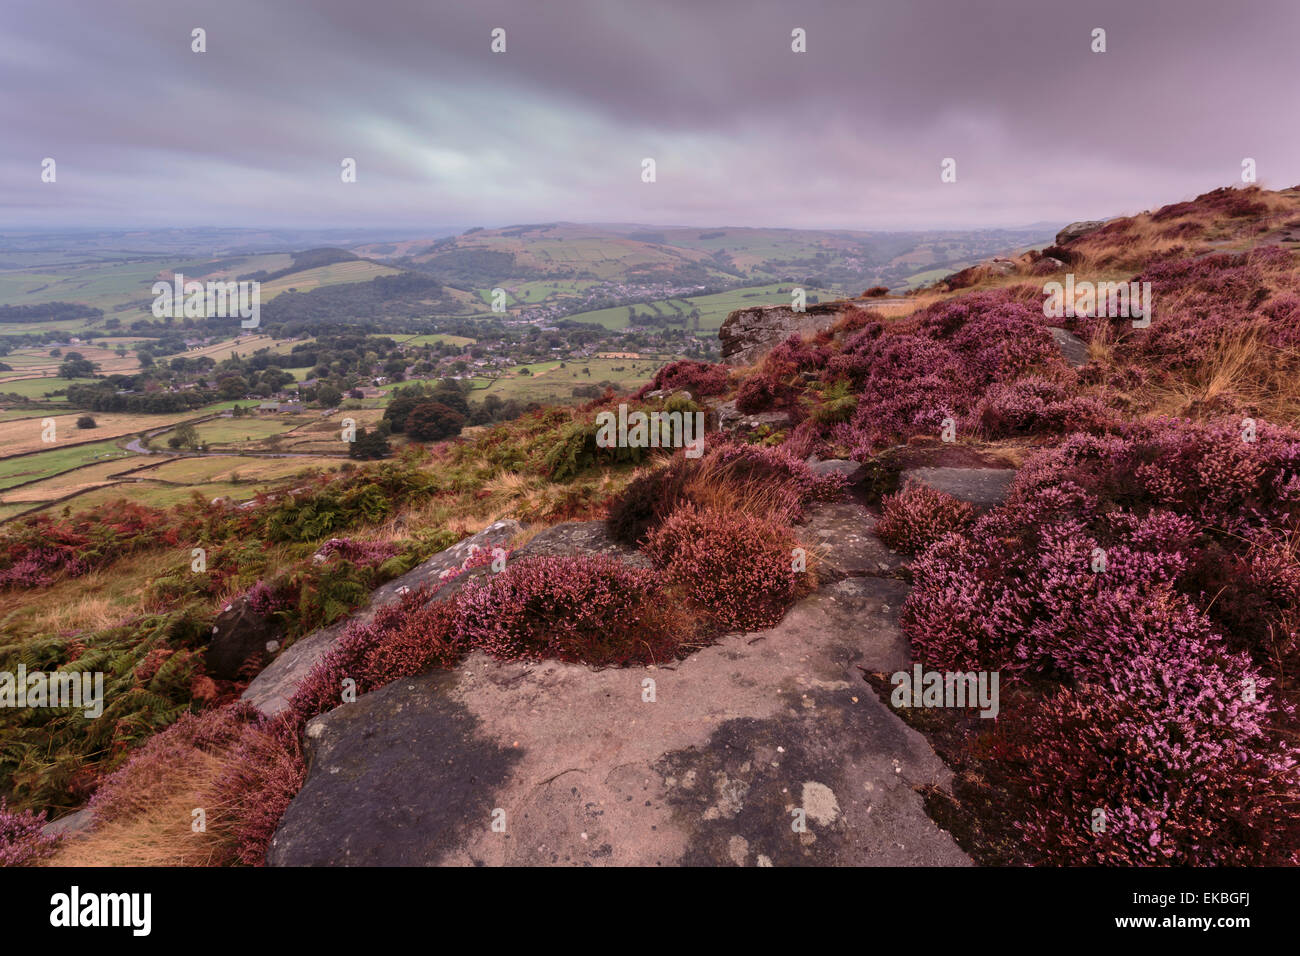 Heather on Curbar Edge at dawn with Curbar and distant Calver villages, late summer, Peak District, Derbyshire, England, Europe Stock Photo